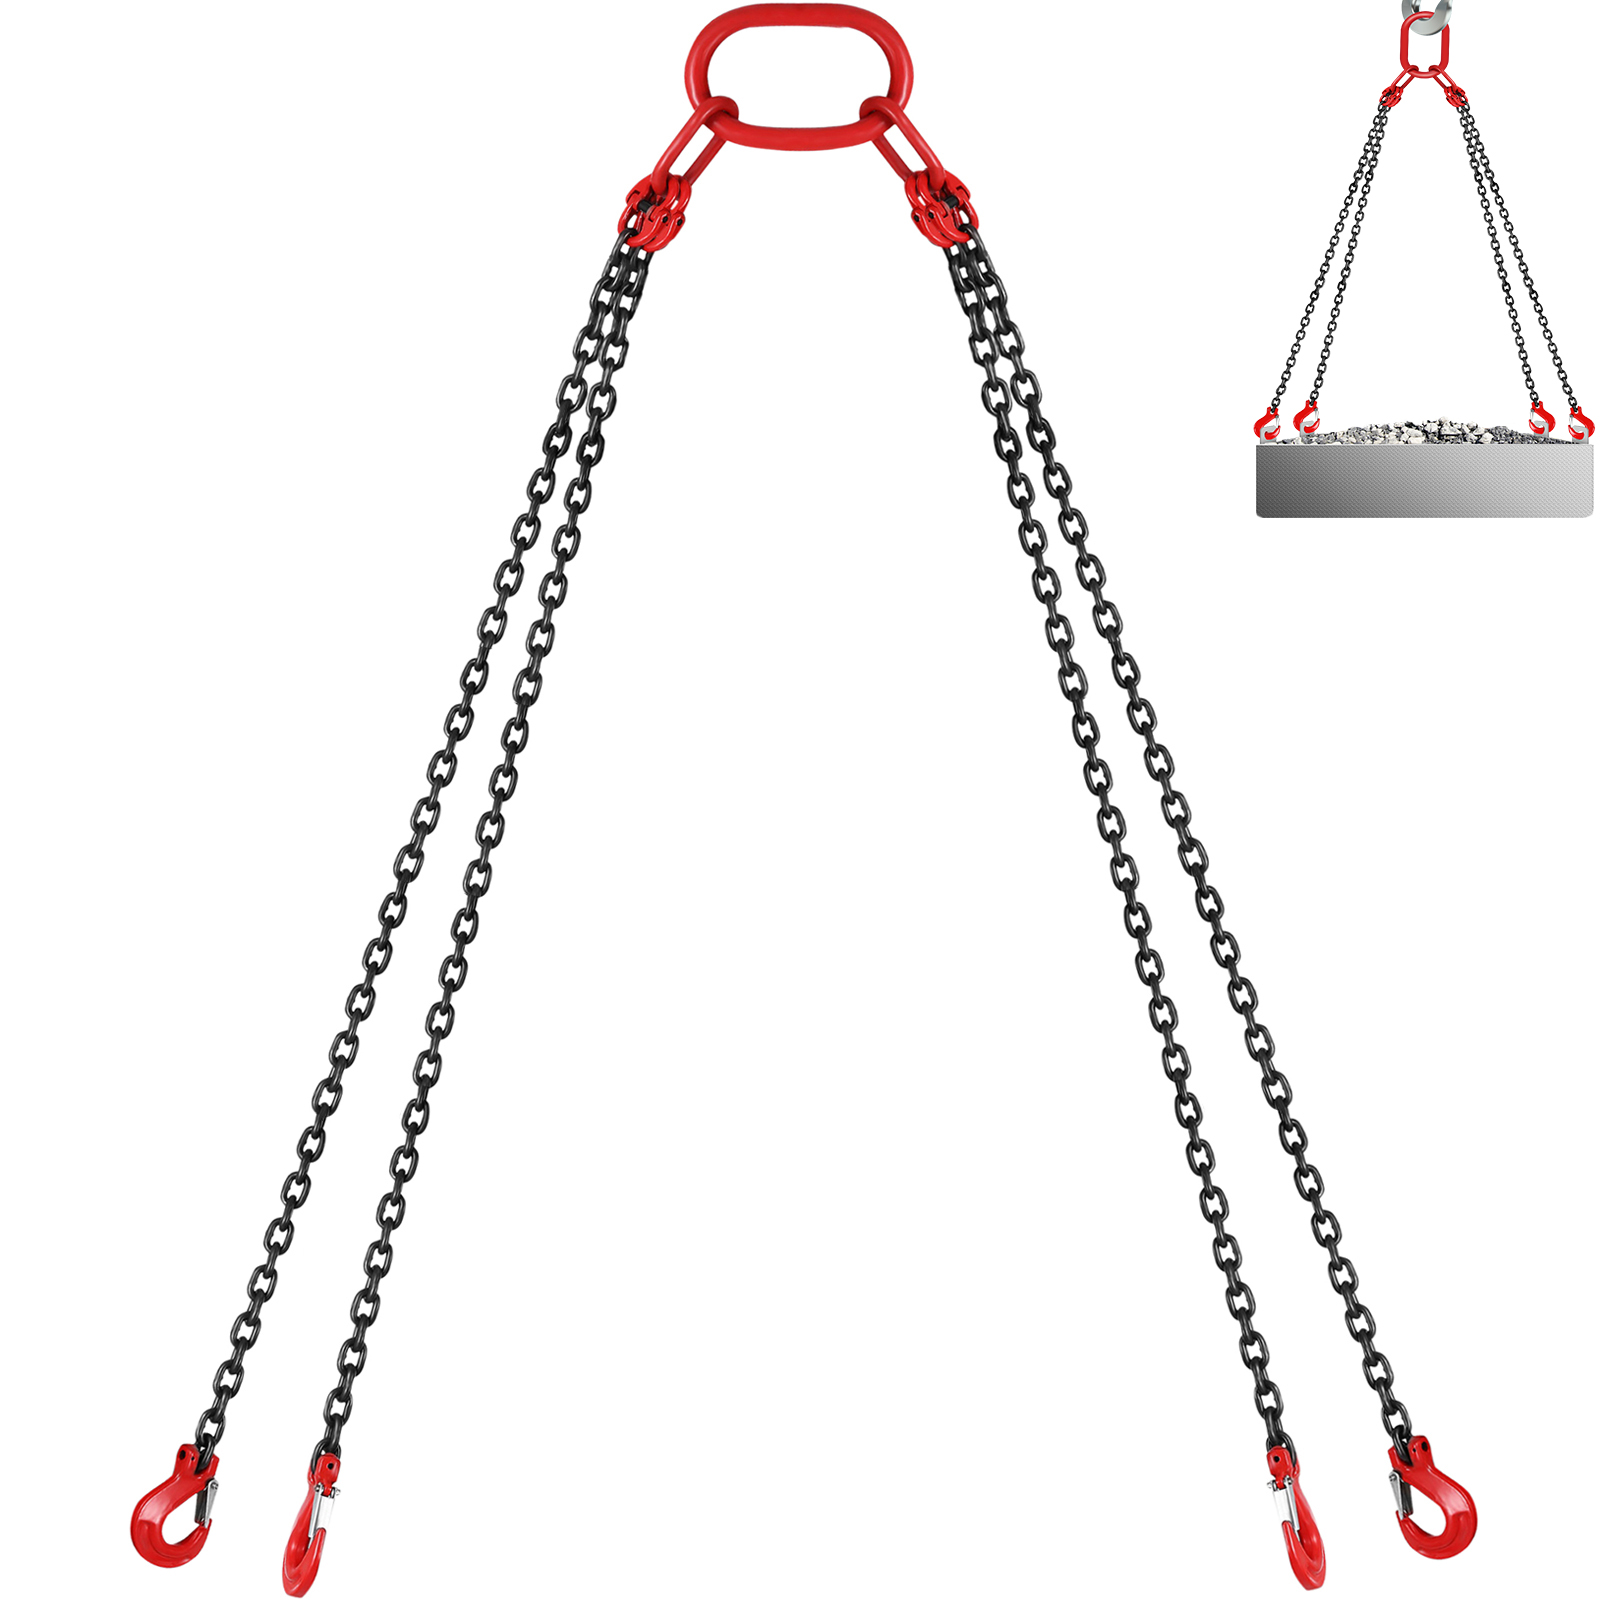 10ft Chain Sling With 4 Legs 5t Capacity Lever Chain Block Lifting Rigging от Vevor Many GEOs